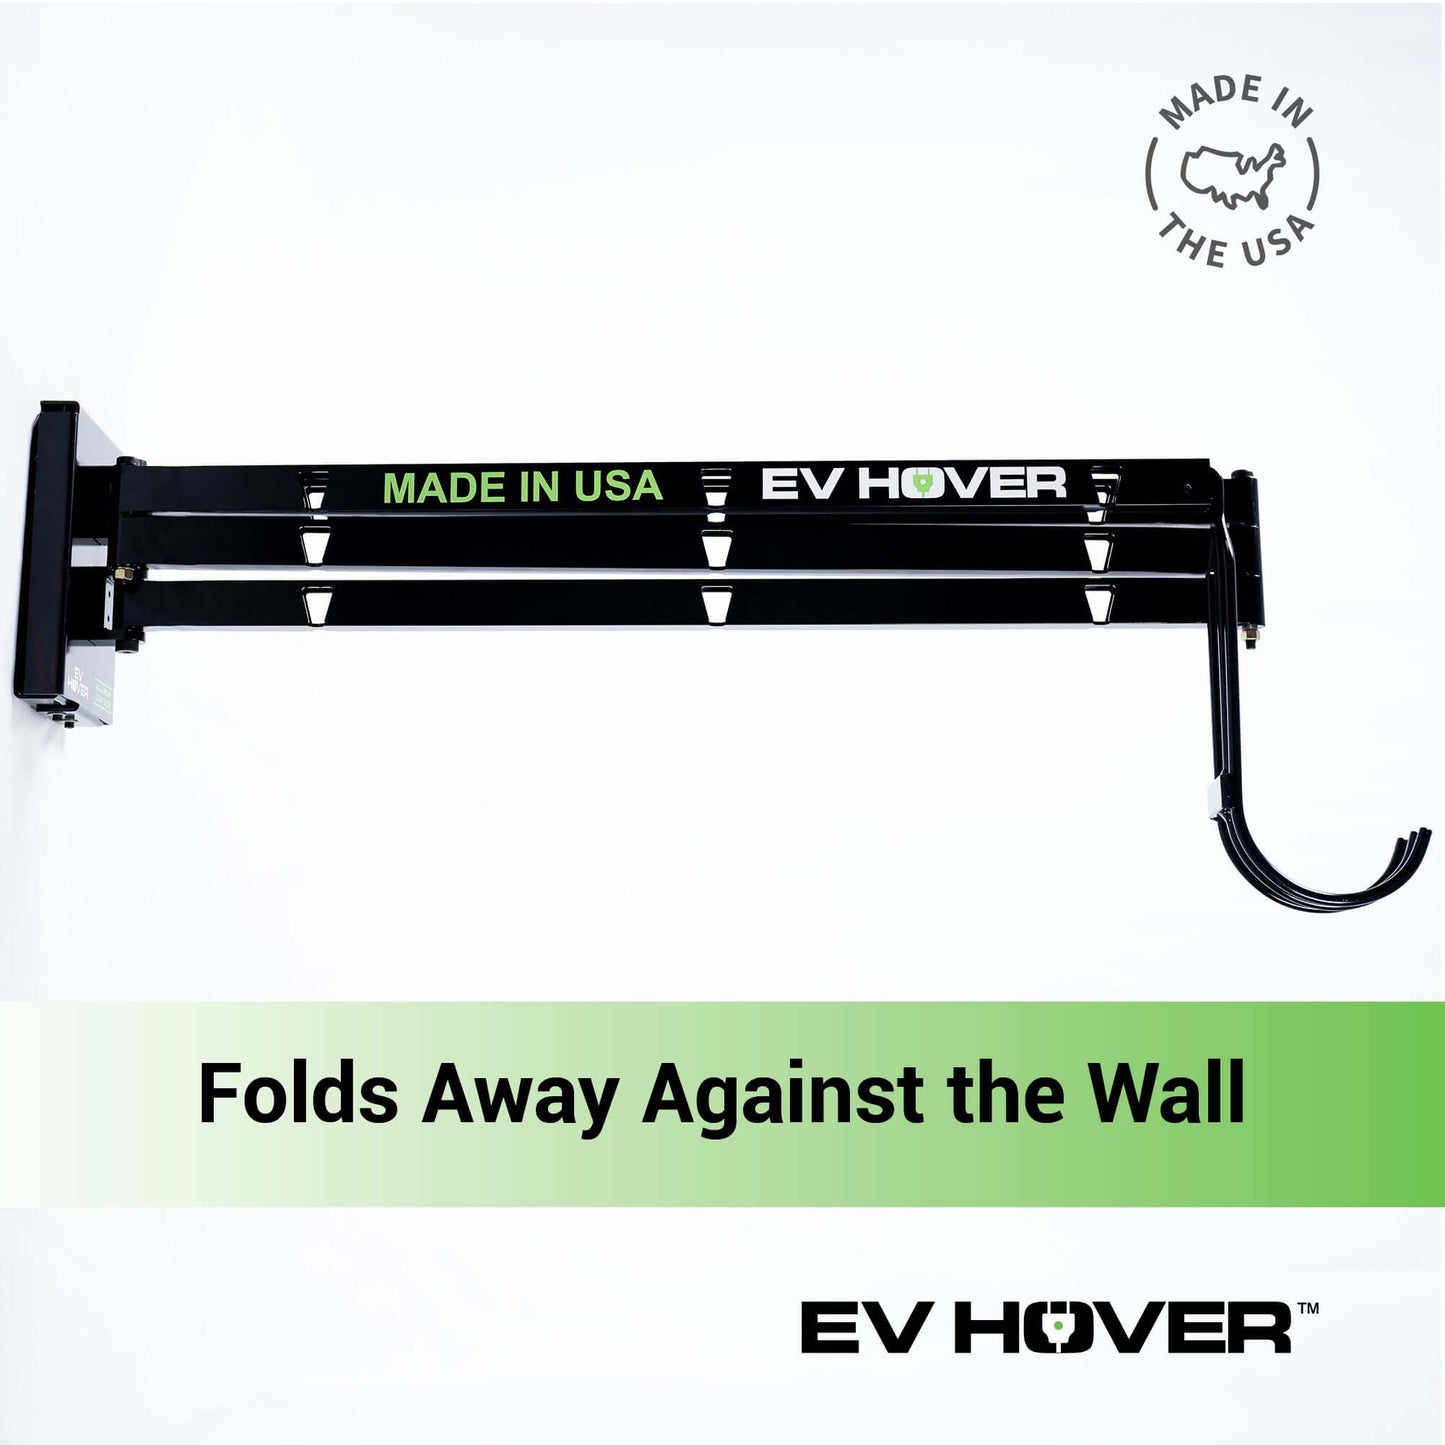 EV Hover folds away against the wall